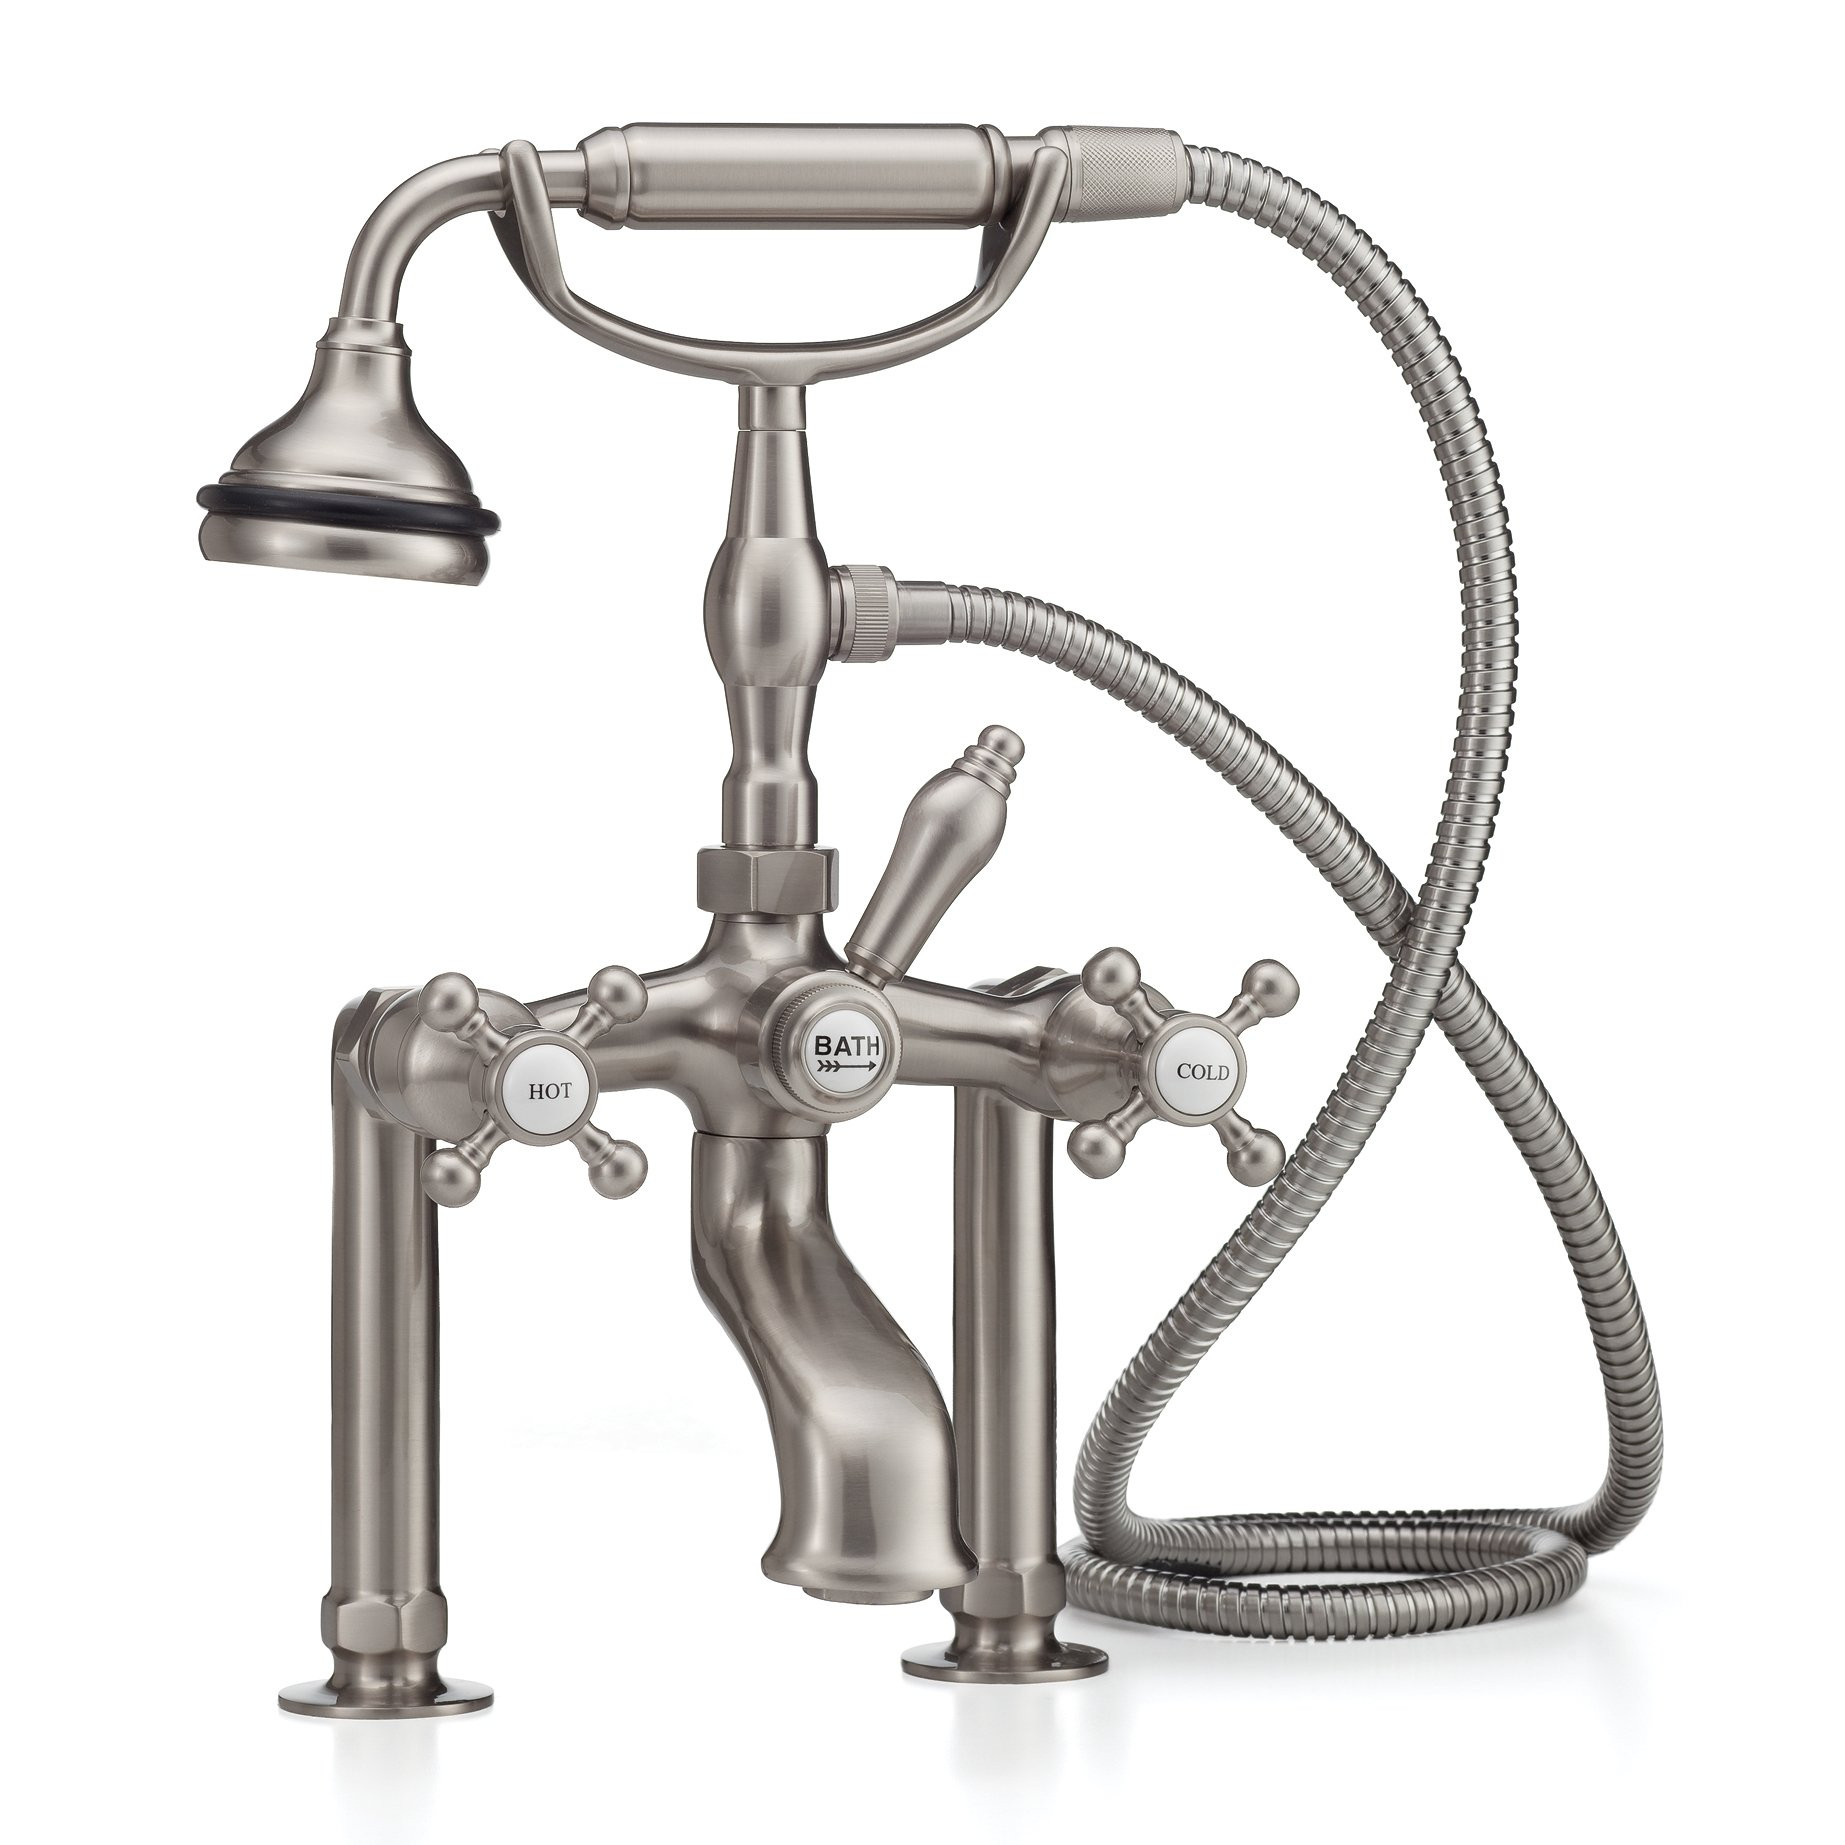 Cheviot 5121-..-LEV Lever Handles Bathtub Filler - Shown with cross Handle - rim mount - extra Tall